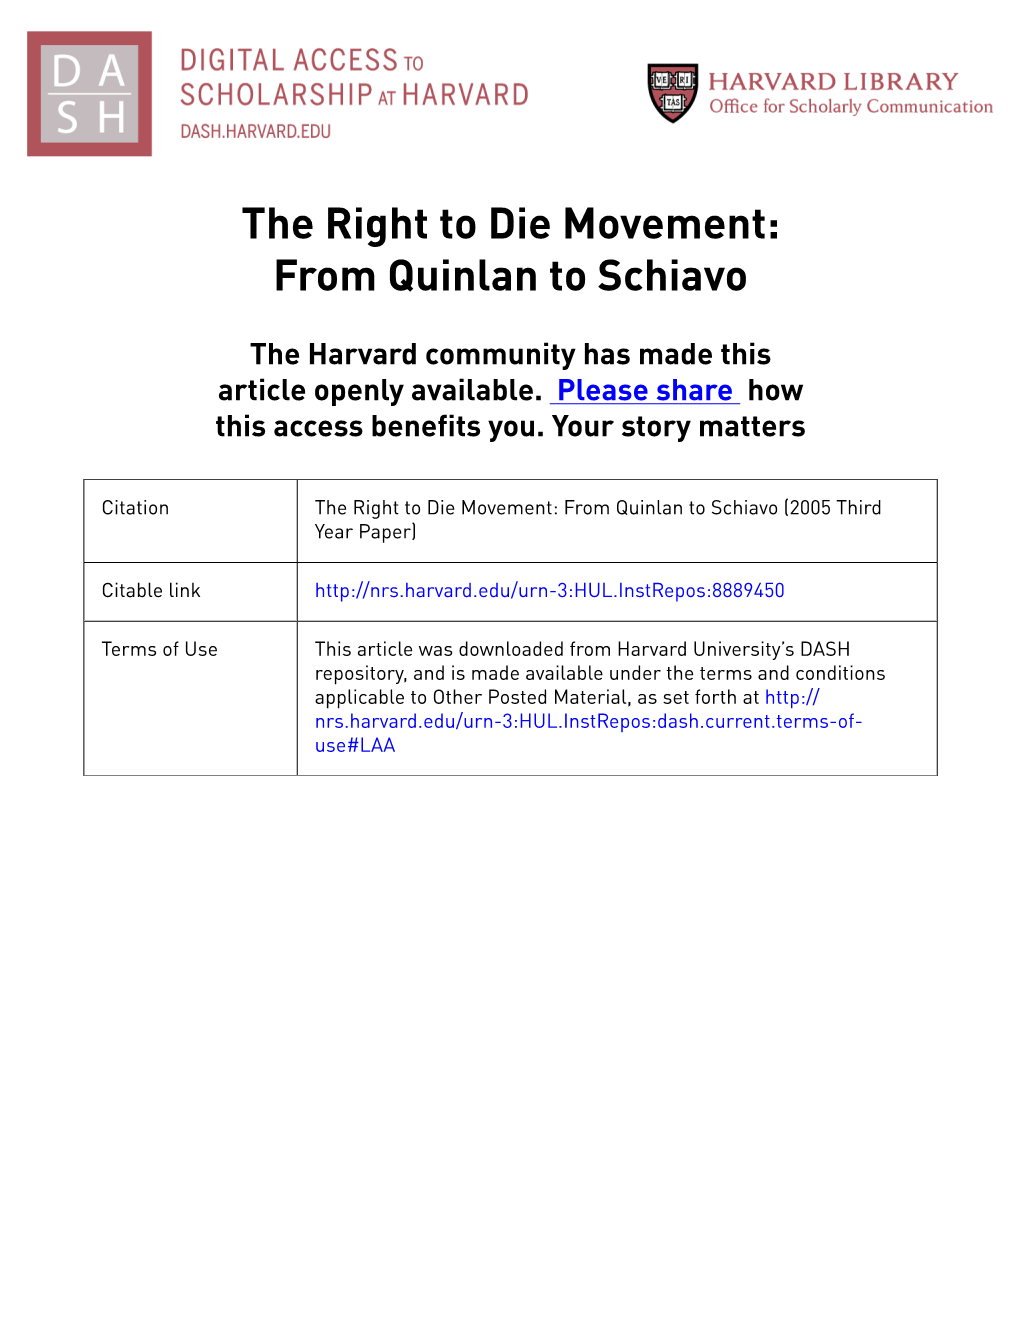 The Right to Die Movement: from Quinlan to Schiavo